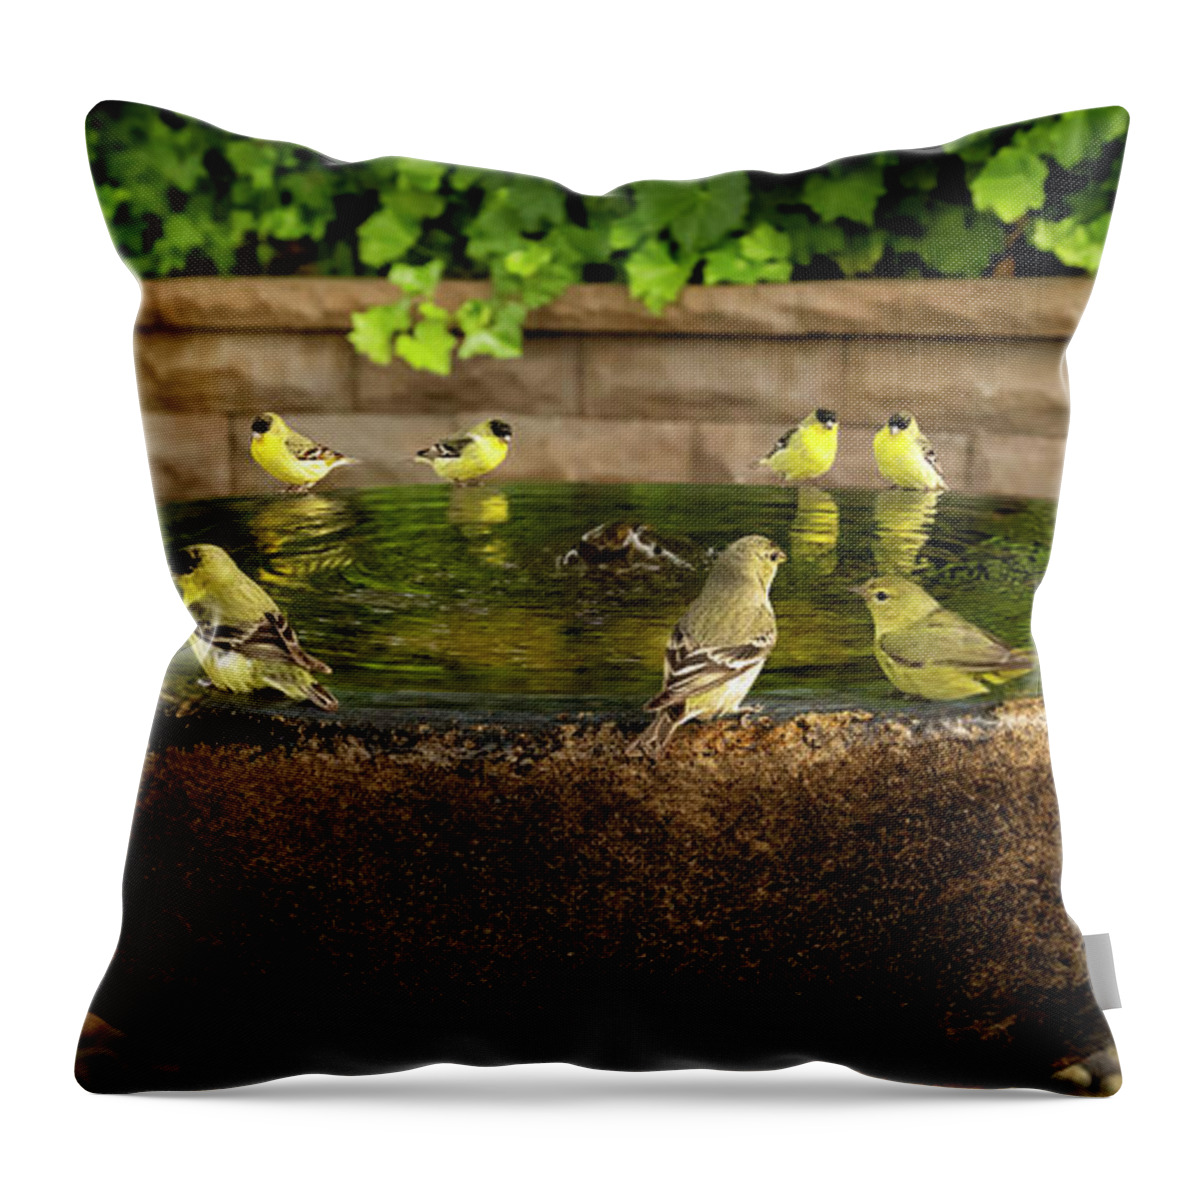 Gary-johnson Throw Pillow featuring the photograph Happy Hour at the Watering Hole by Gary Johnson